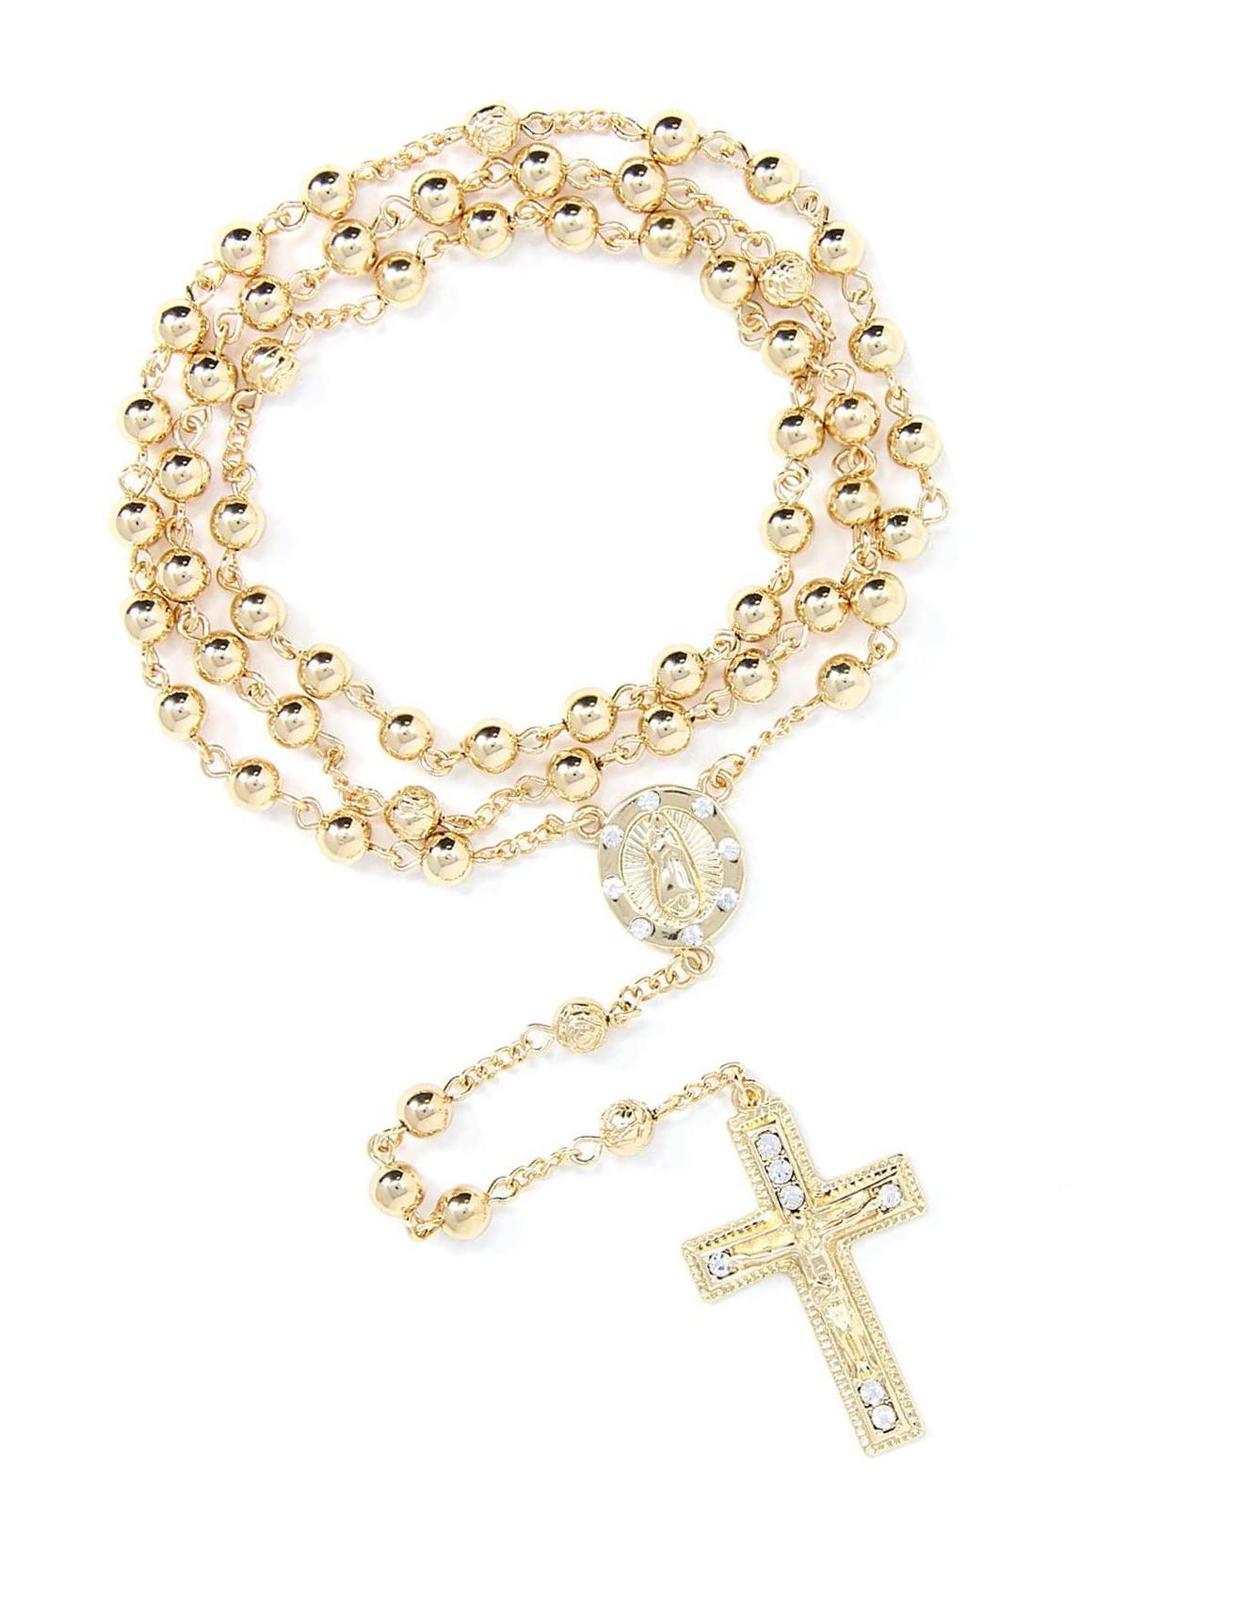 Primary image for Me Plus 6mm CCB Beads Alloy Crucifix Cross Pendant Rosary 20